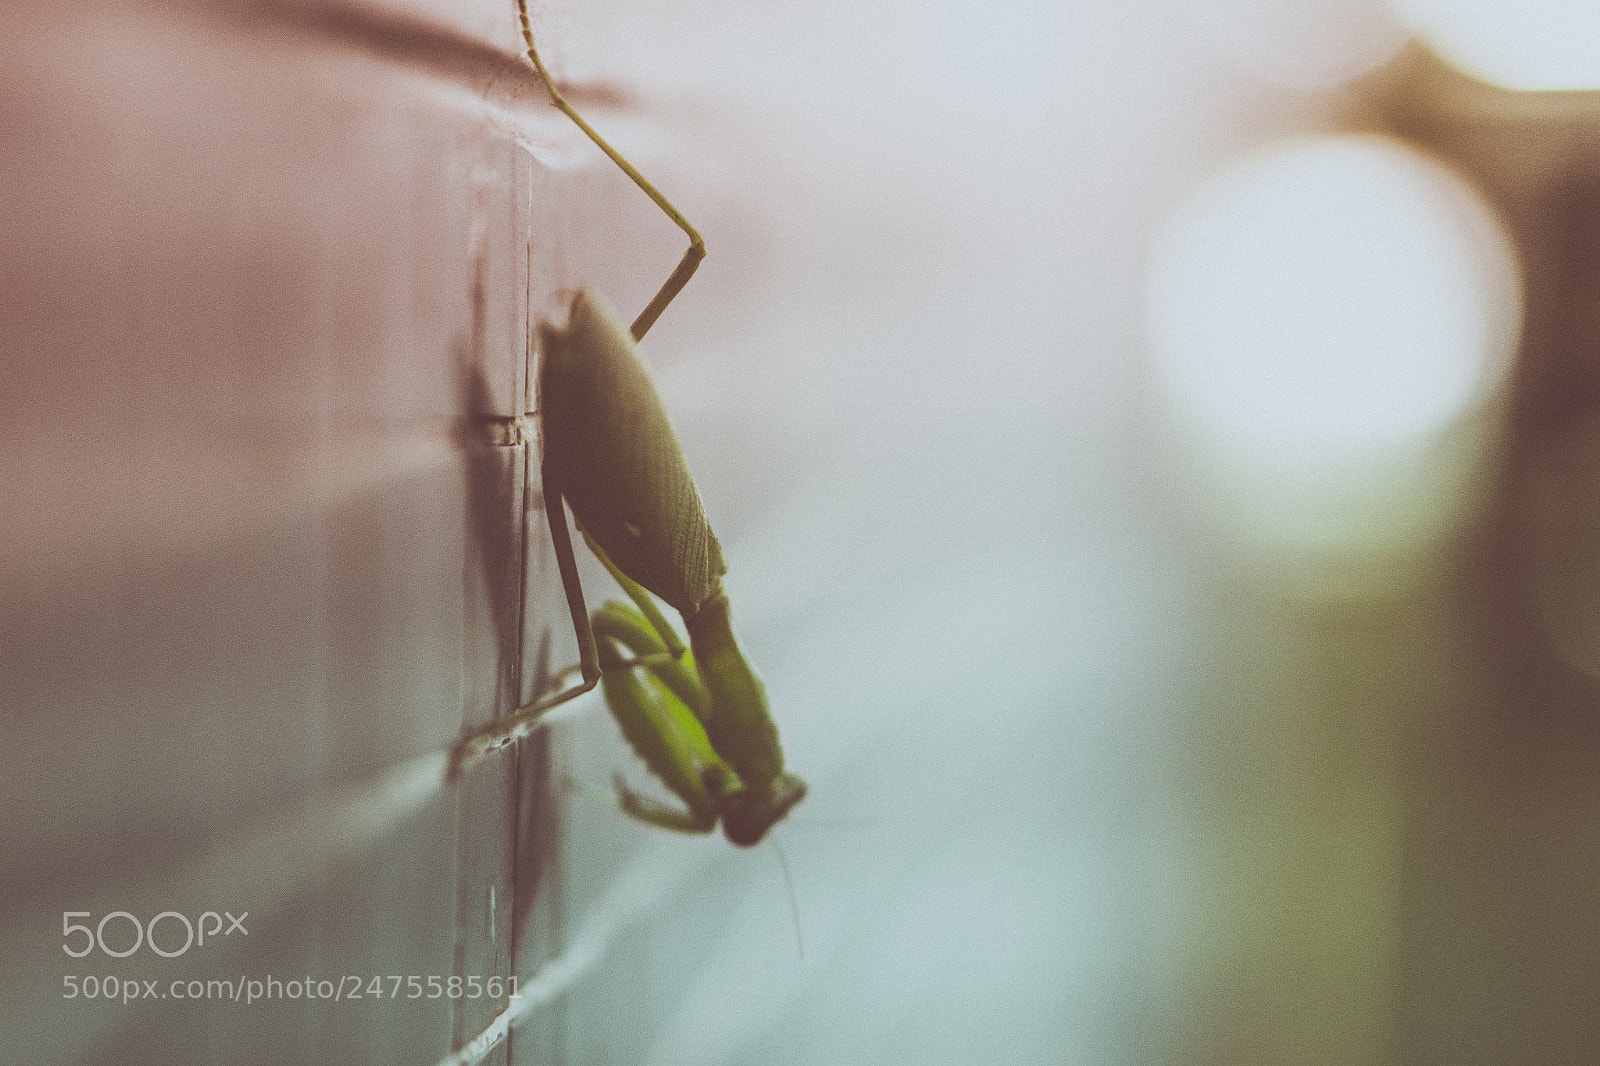 Sony a6300 sample photo. Grasshoper on the wall photography